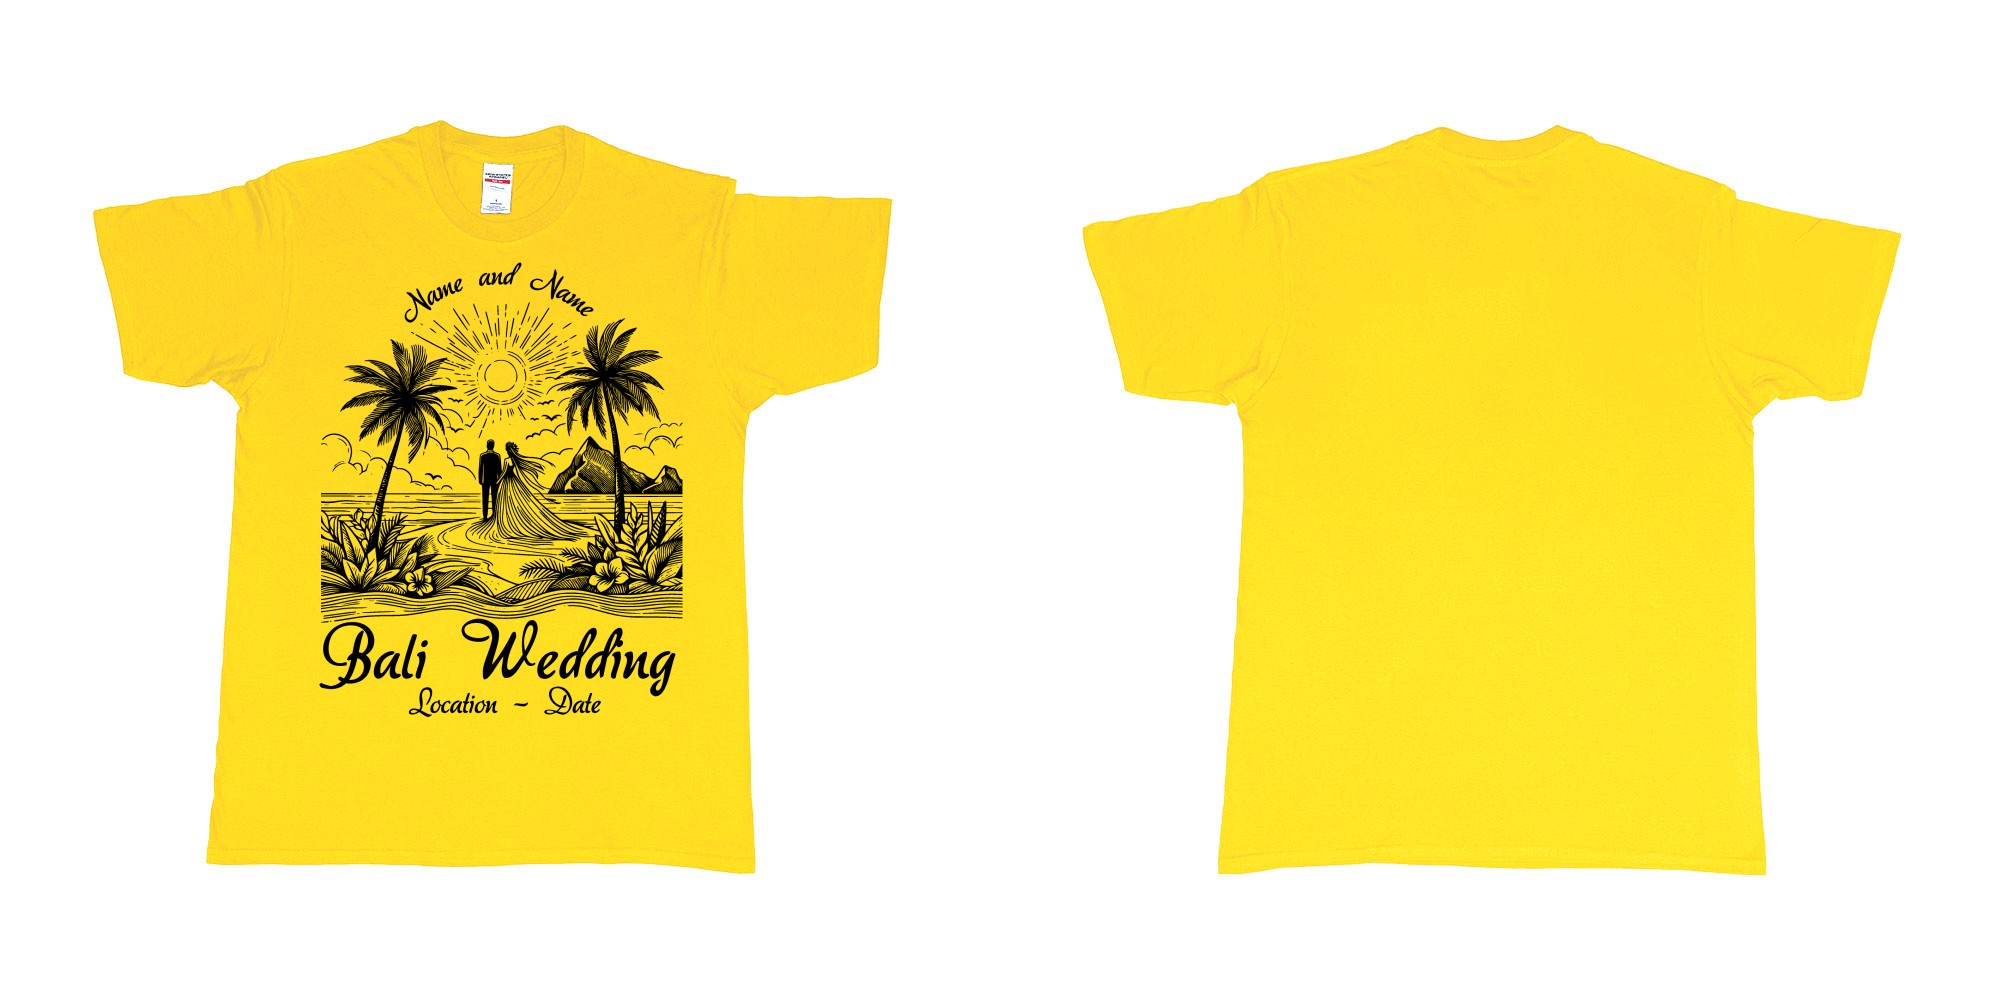 Custom tshirt design bali wedding drawing couple beach sunset palmtrees in fabric color daisy choice your own text made in Bali by The Pirate Way